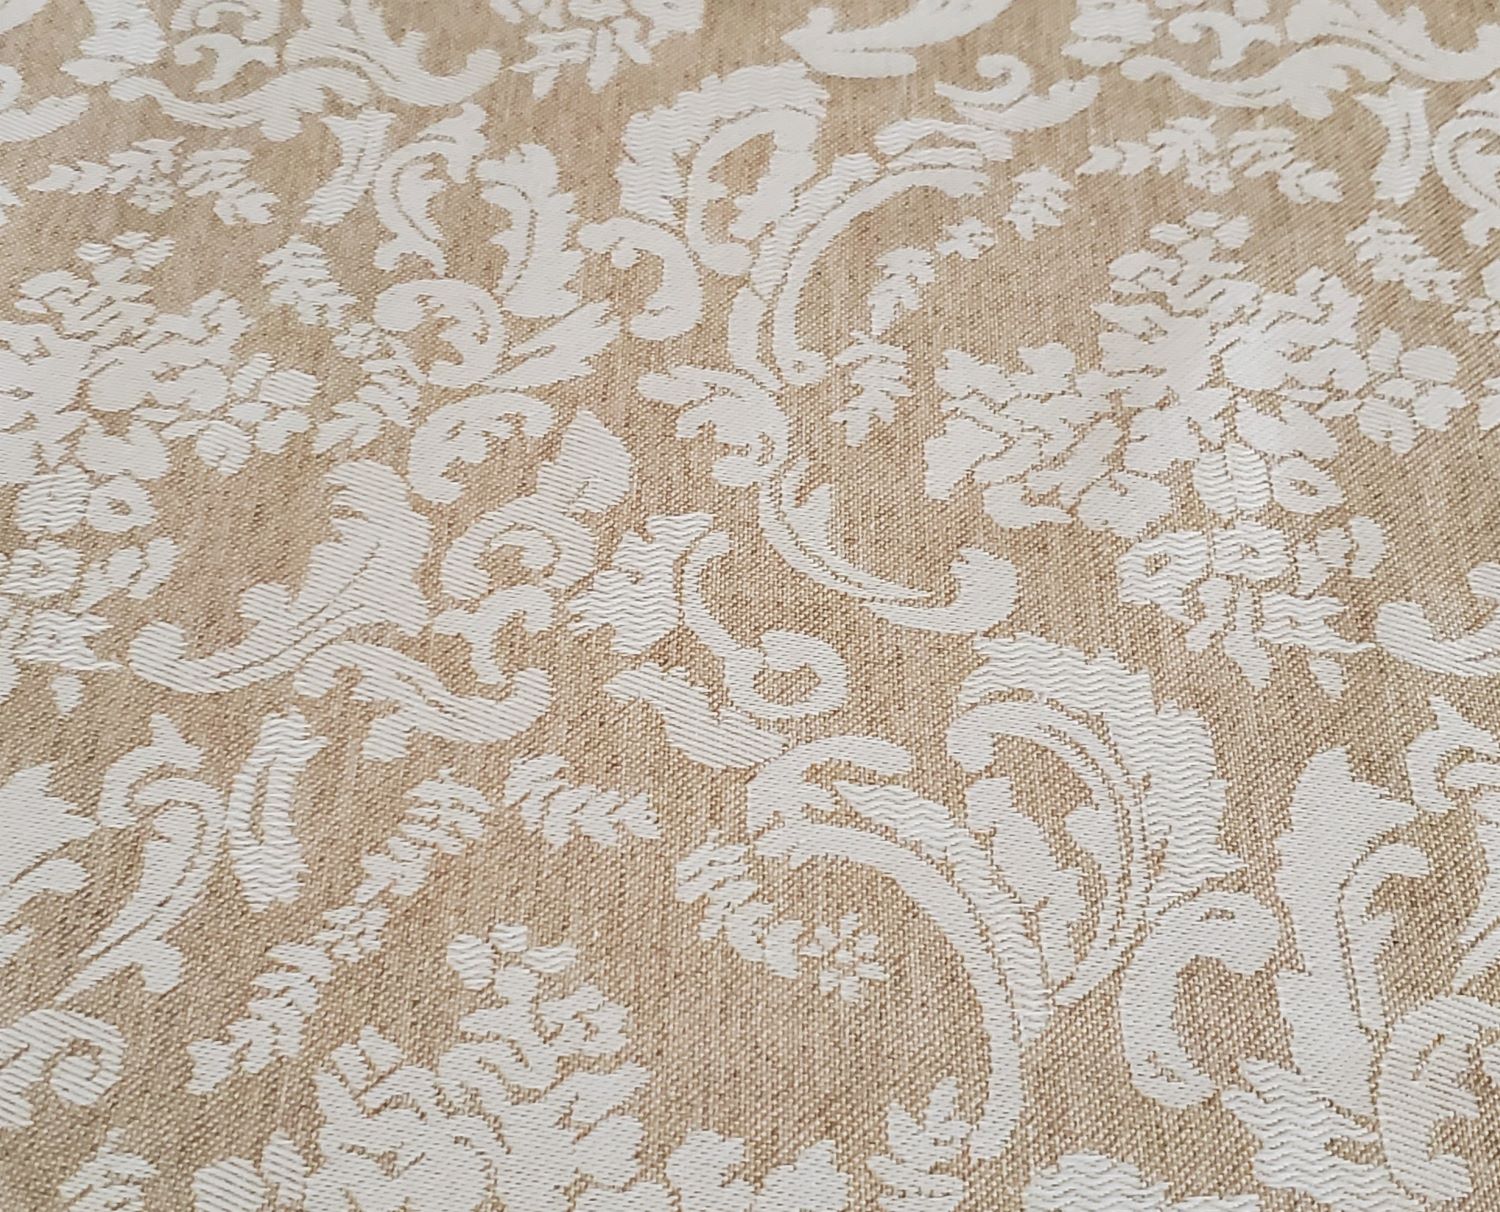 AMBOISE GOLD BEIGE French Luxury Royal Design Rectangular Tablecloth -  French Oilcloth Stain Resistant Wipe Off Fabric - Elegant Party Table  Decoration